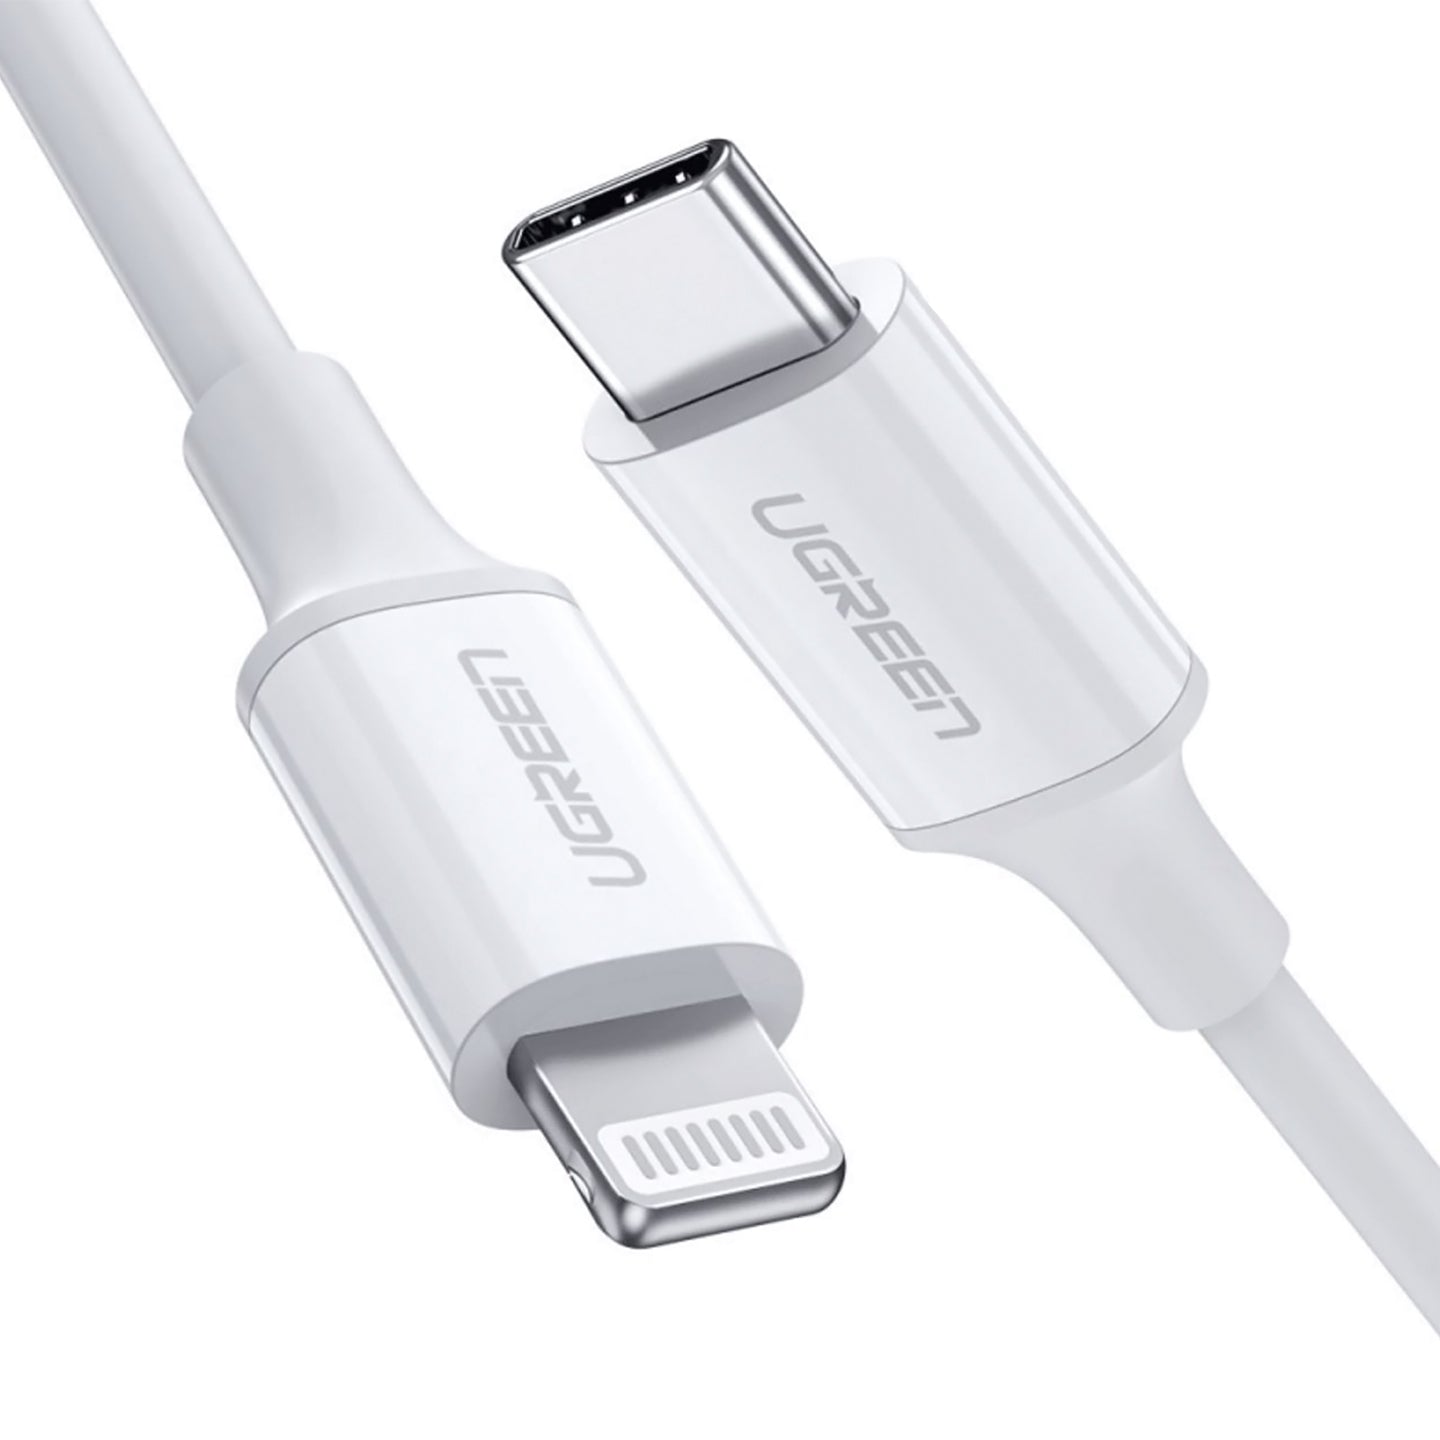 UGREEN 20W PD USB-C to Lightning Fast Charging 3A Cable with 480Mbps High Speed Data Sync, Nickel Plating ABS Shell (1.5M, 1M) | 60748